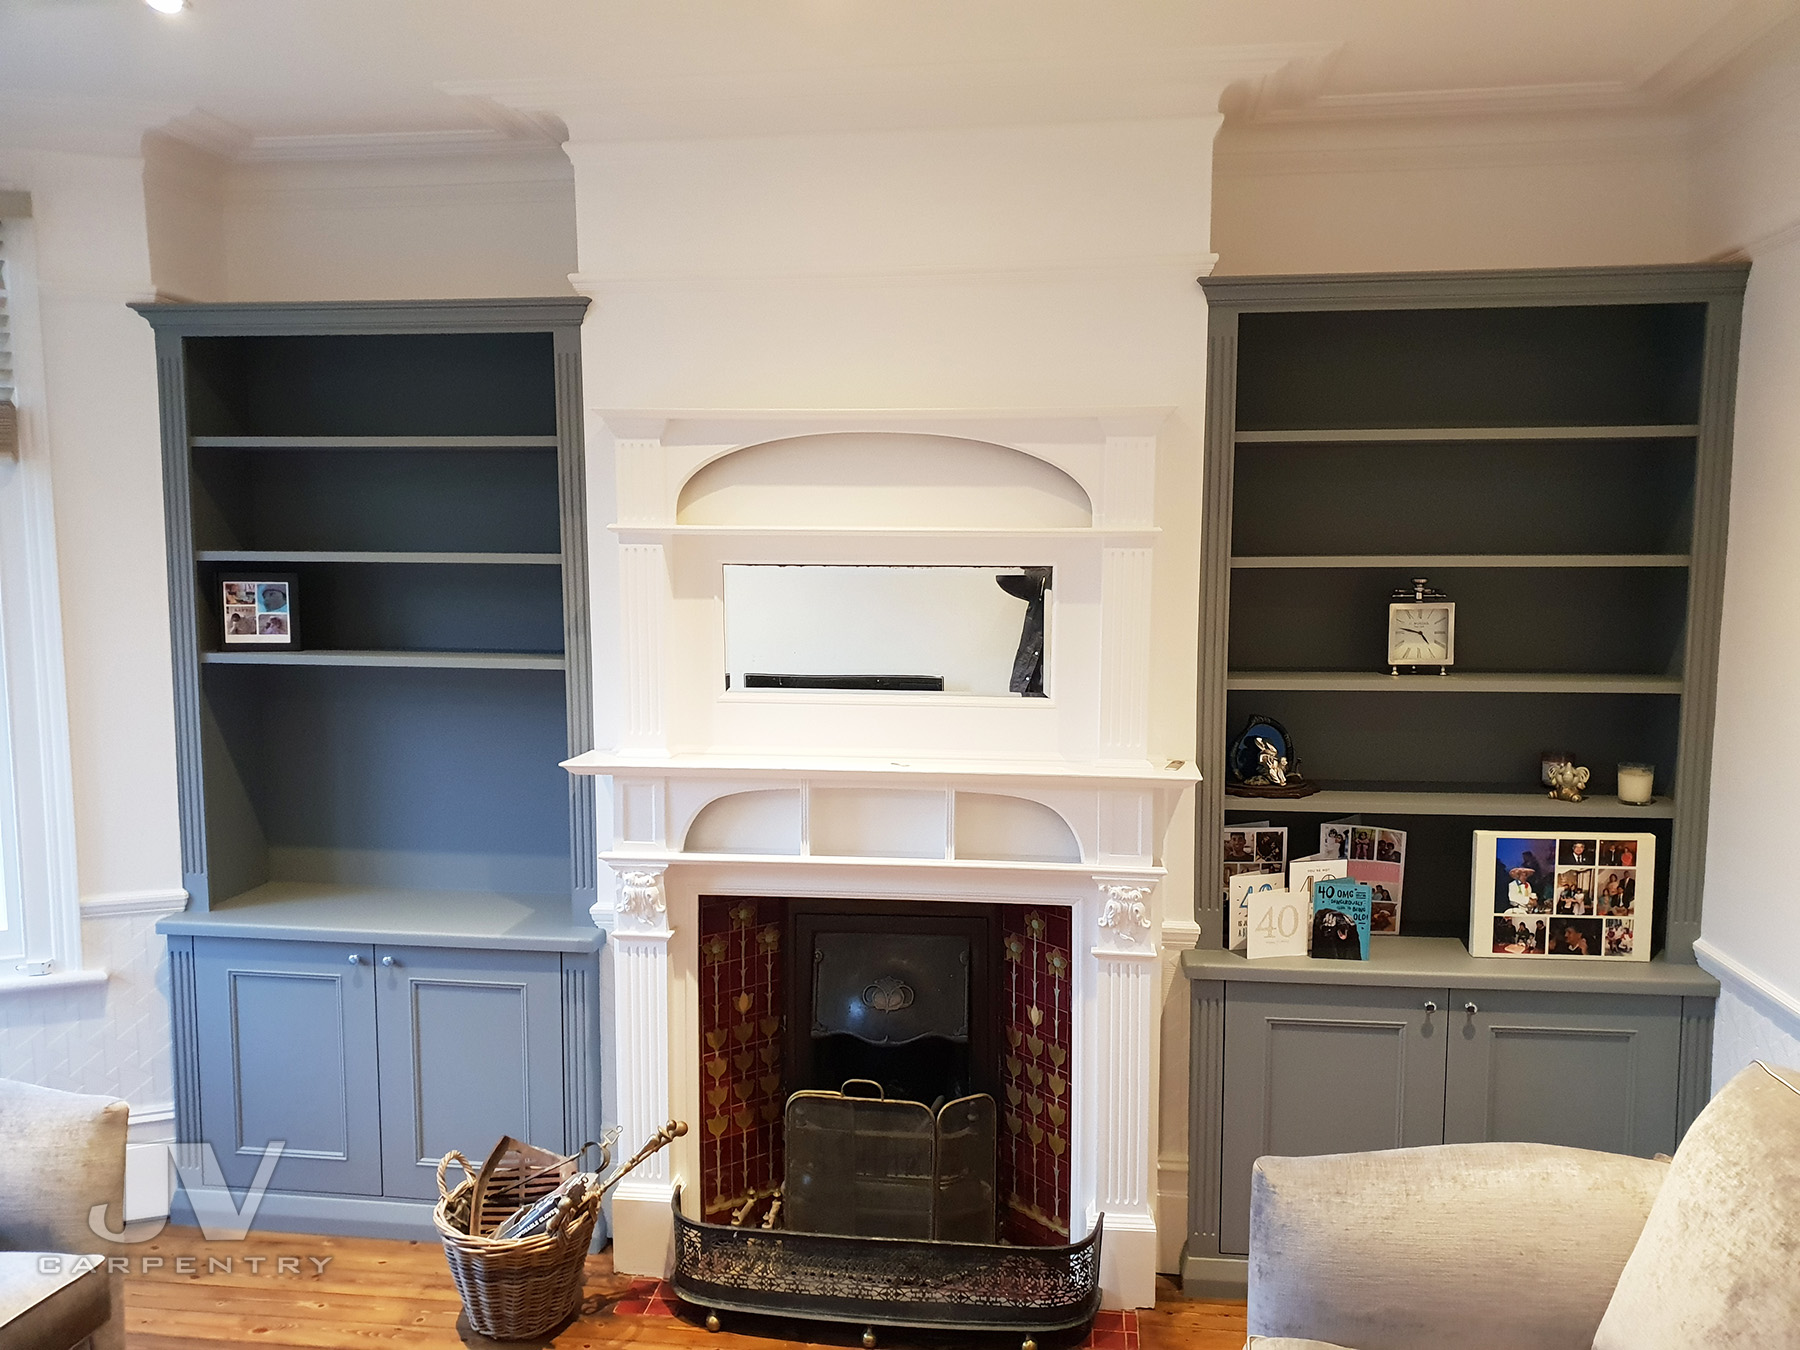 Alcove bookcases in the living room